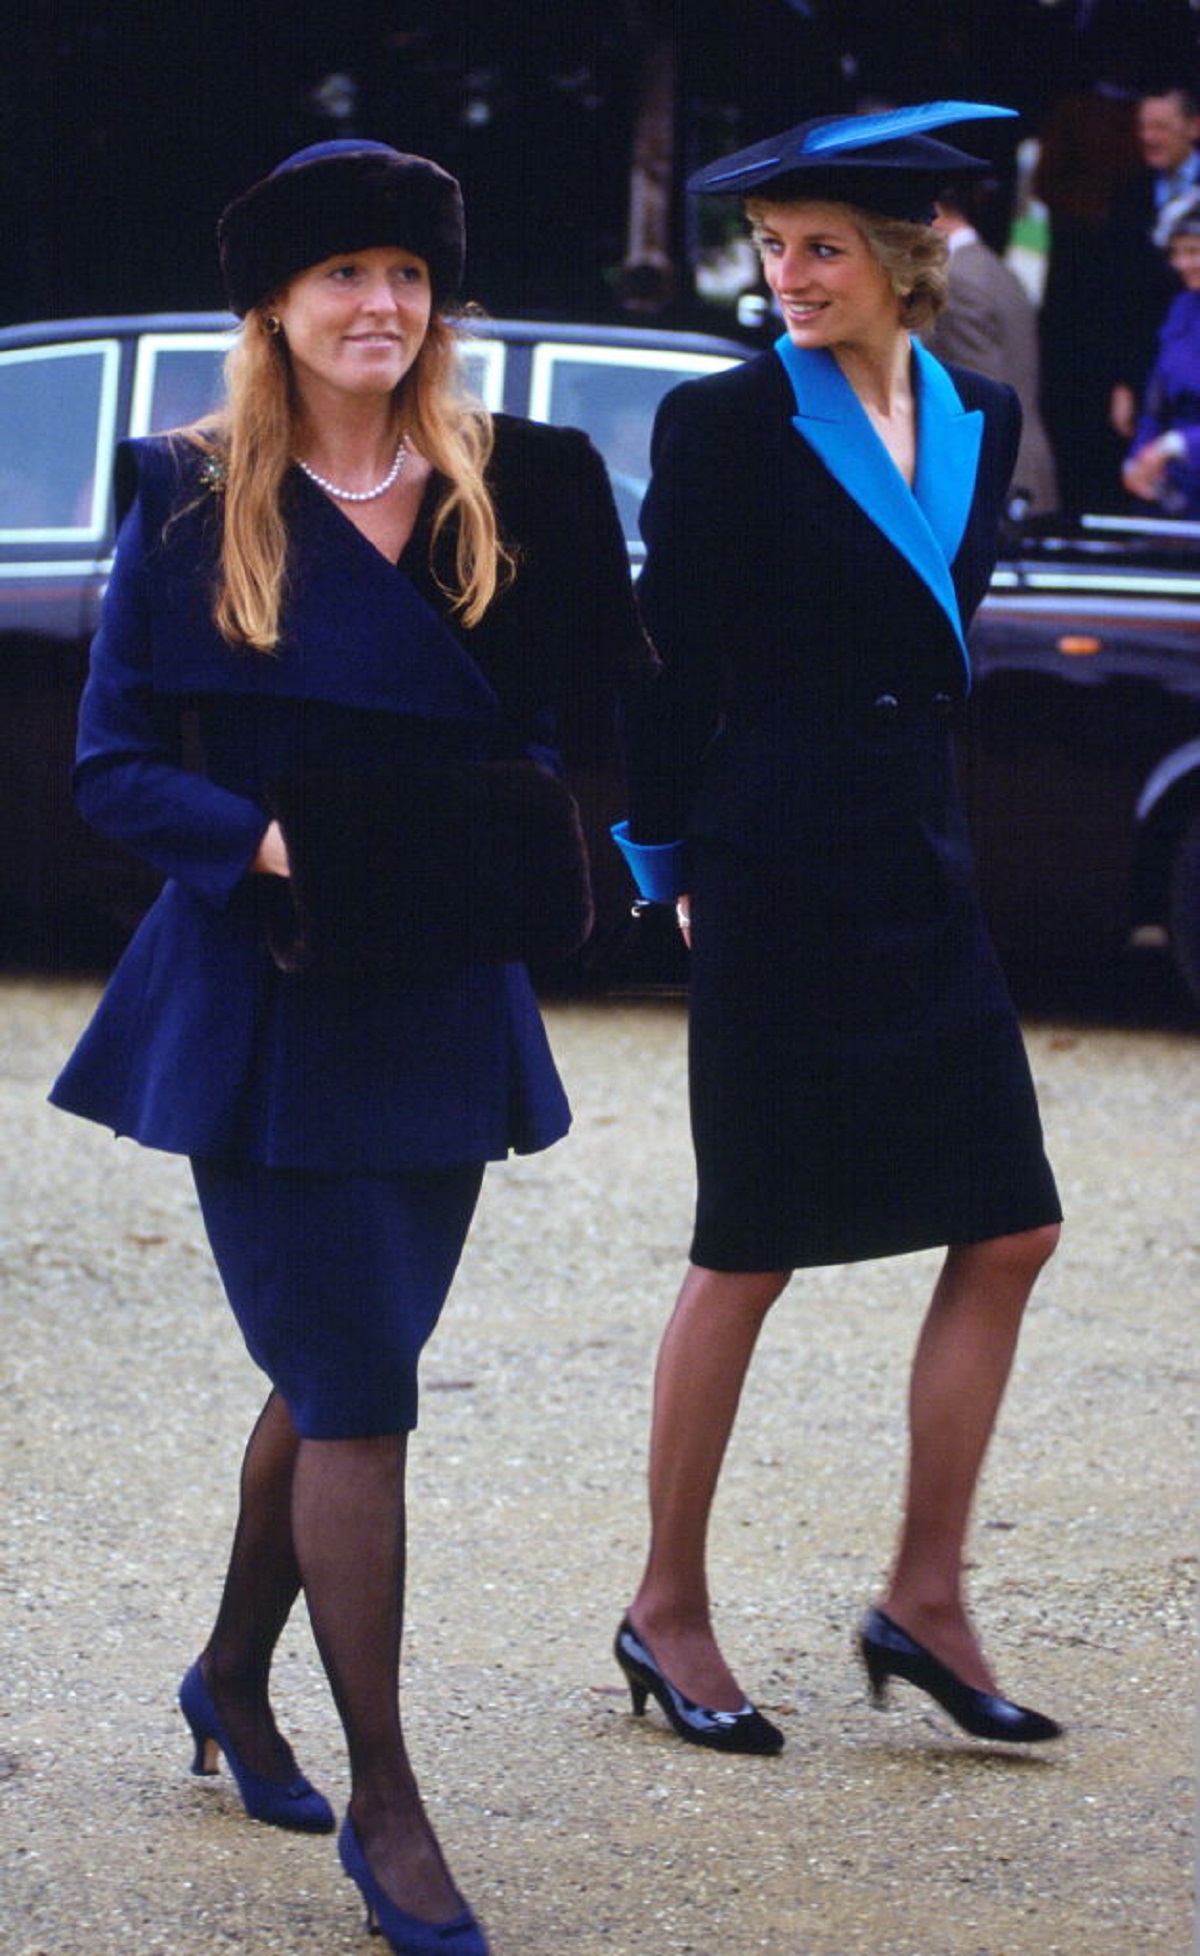 Photo of sisters-in-law Princess Diana and Sarah at Sandringham on Christmas